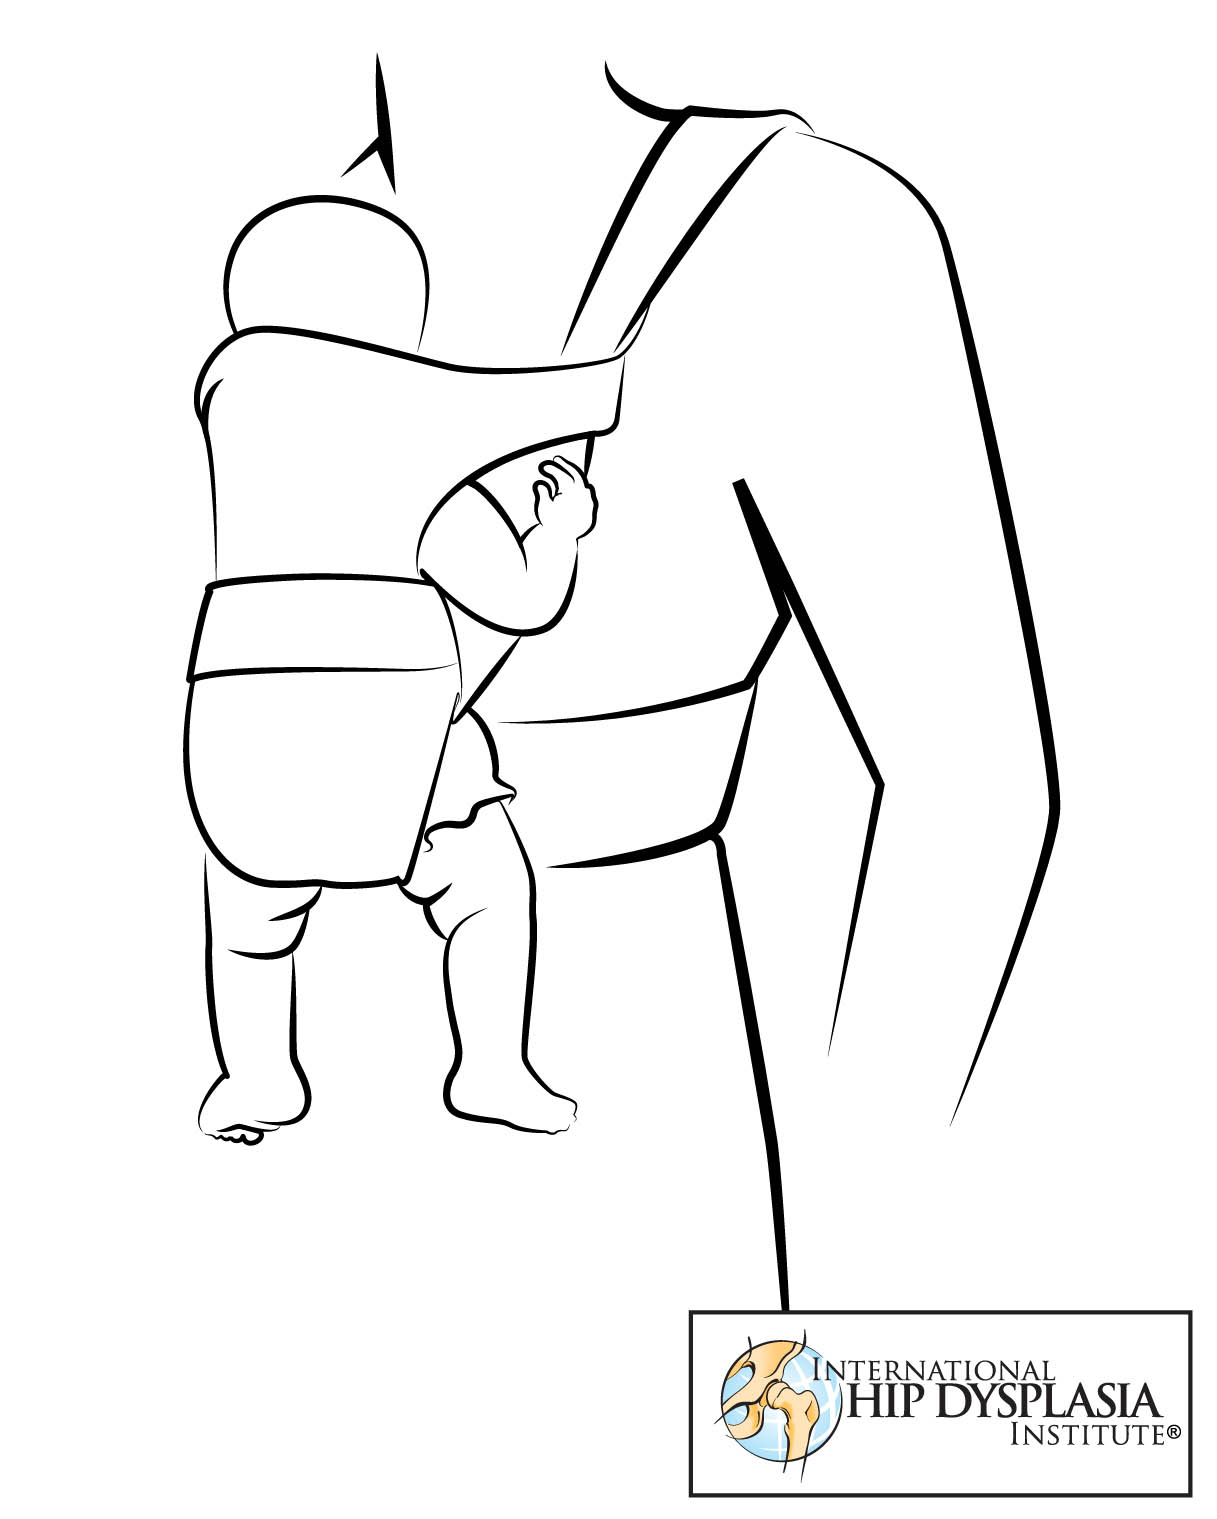 Hip dysplasia lawsuit targets potentially harmful baby carrier design